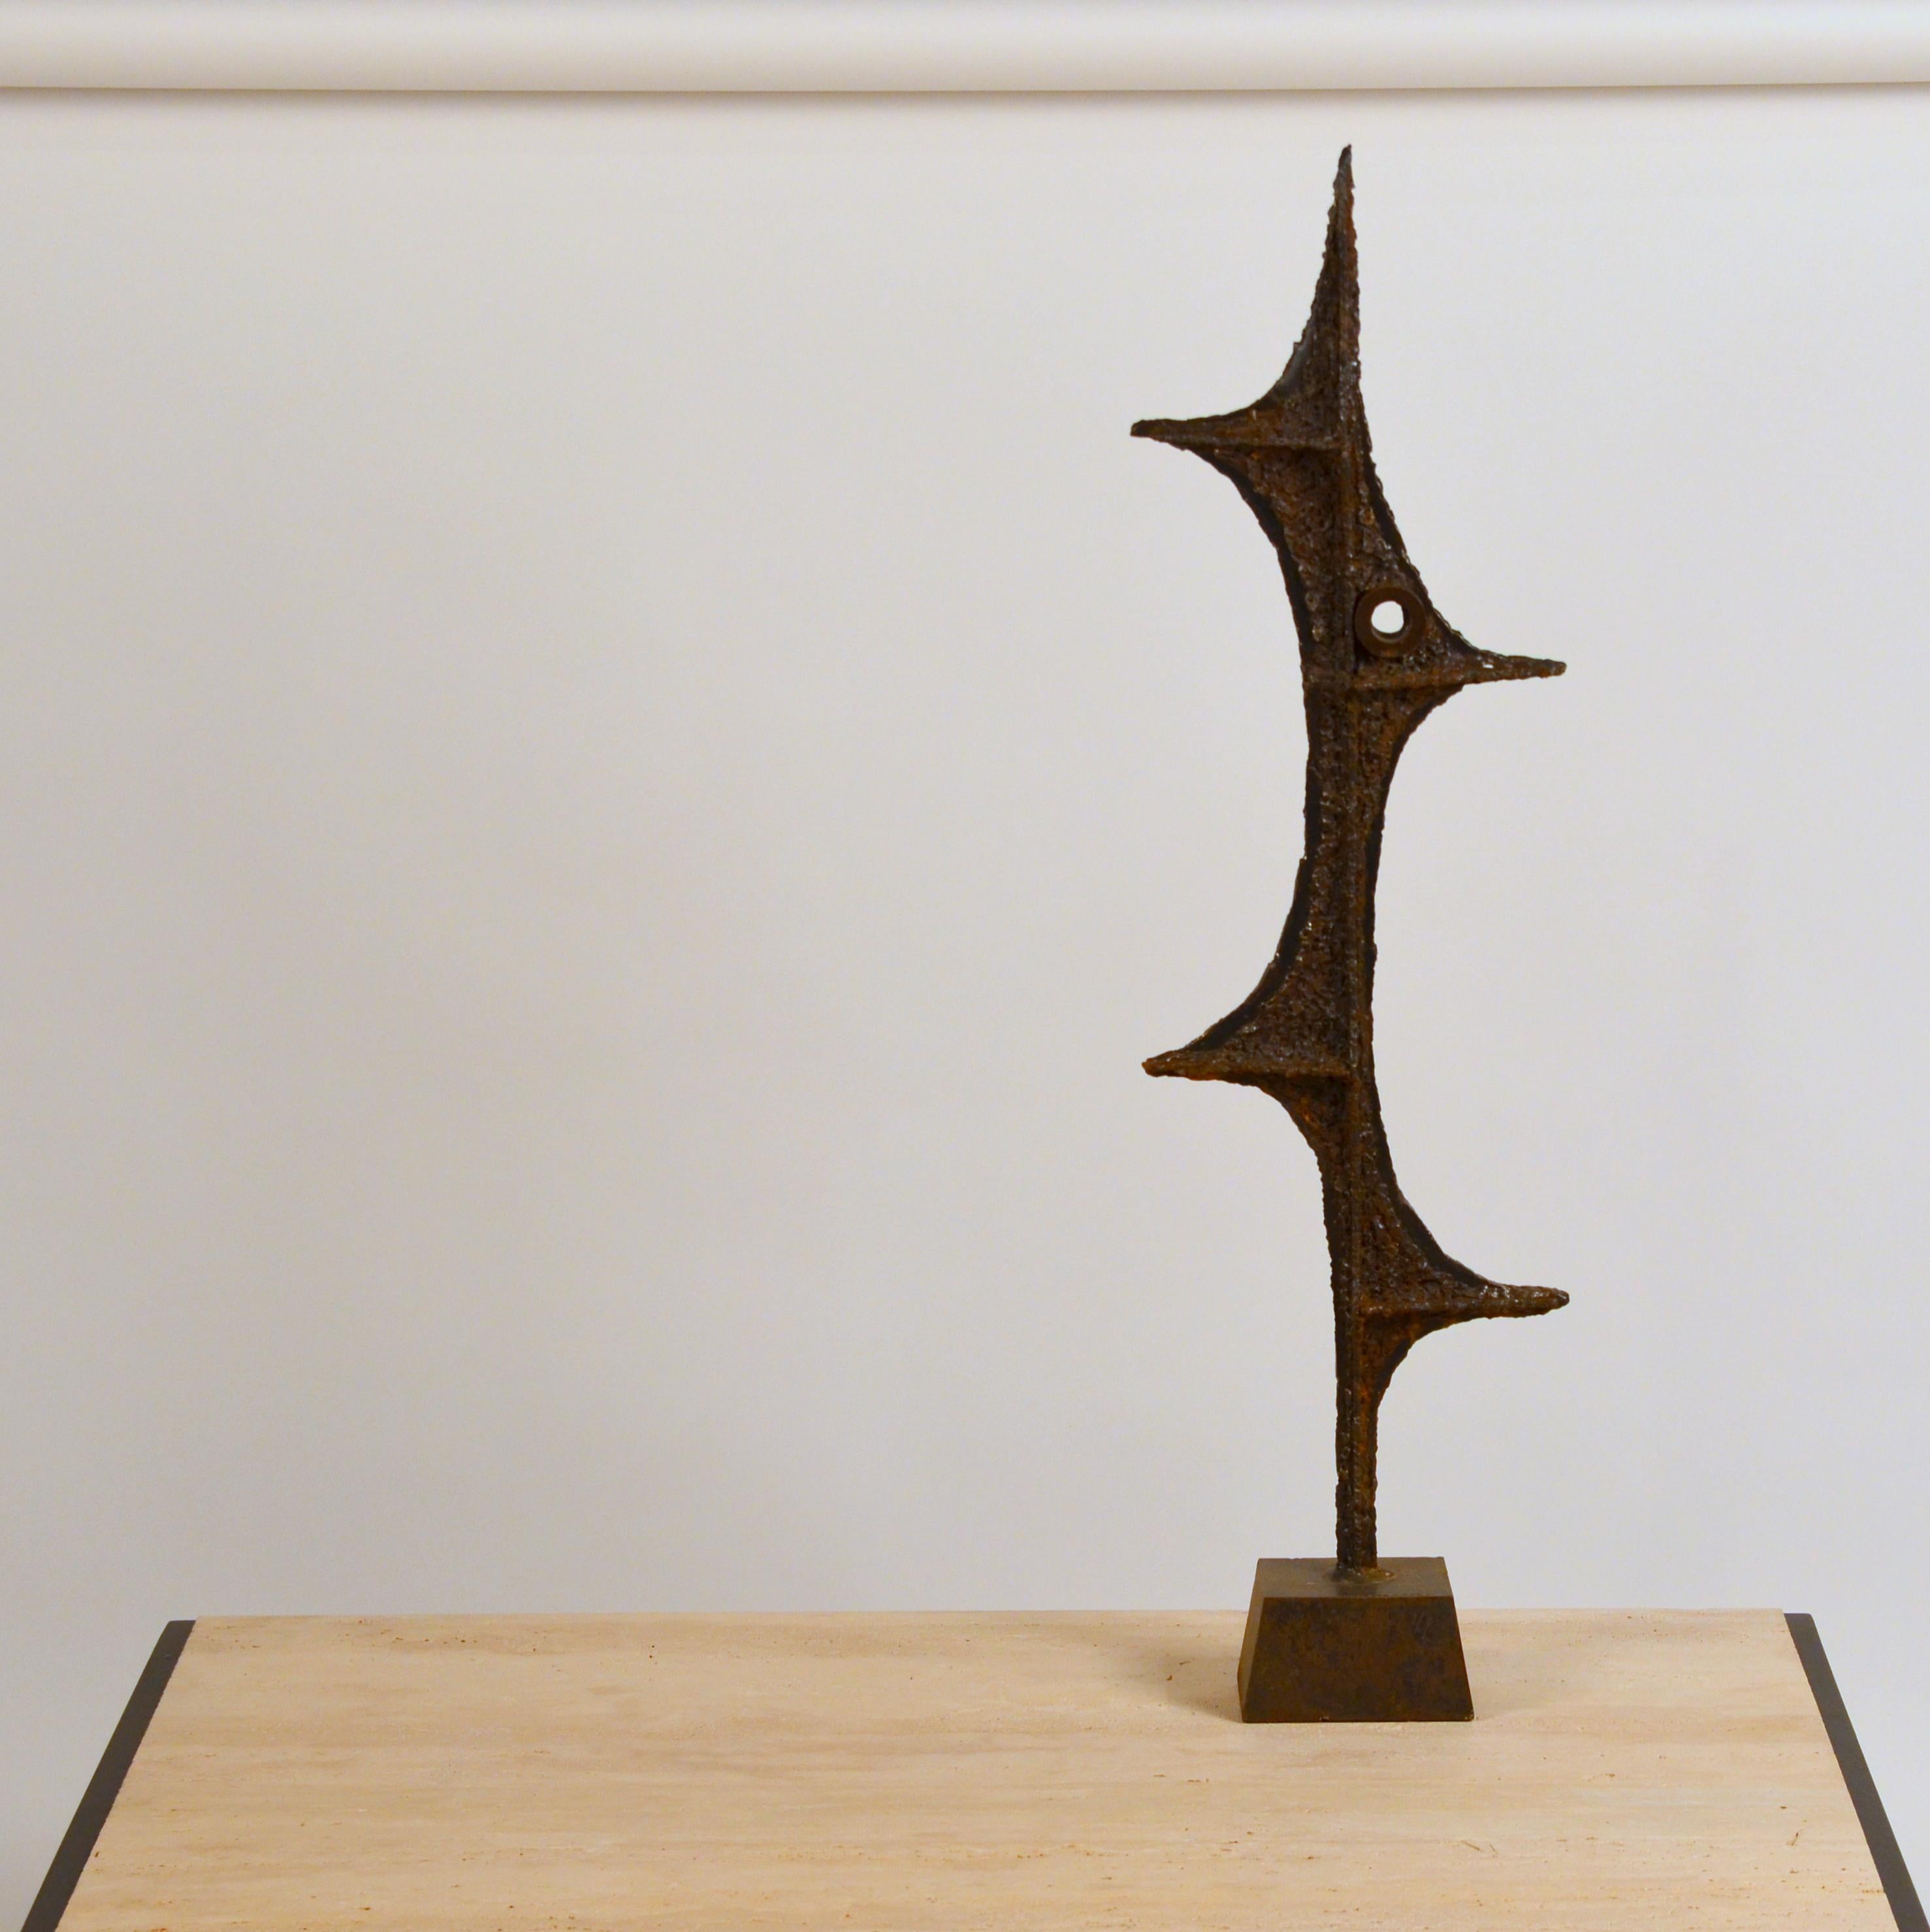 Tall Brutalist studio sculpture by John De La Rosa. Signed.

The last image shows a similar sculpture in an interior setting, for inspiration.